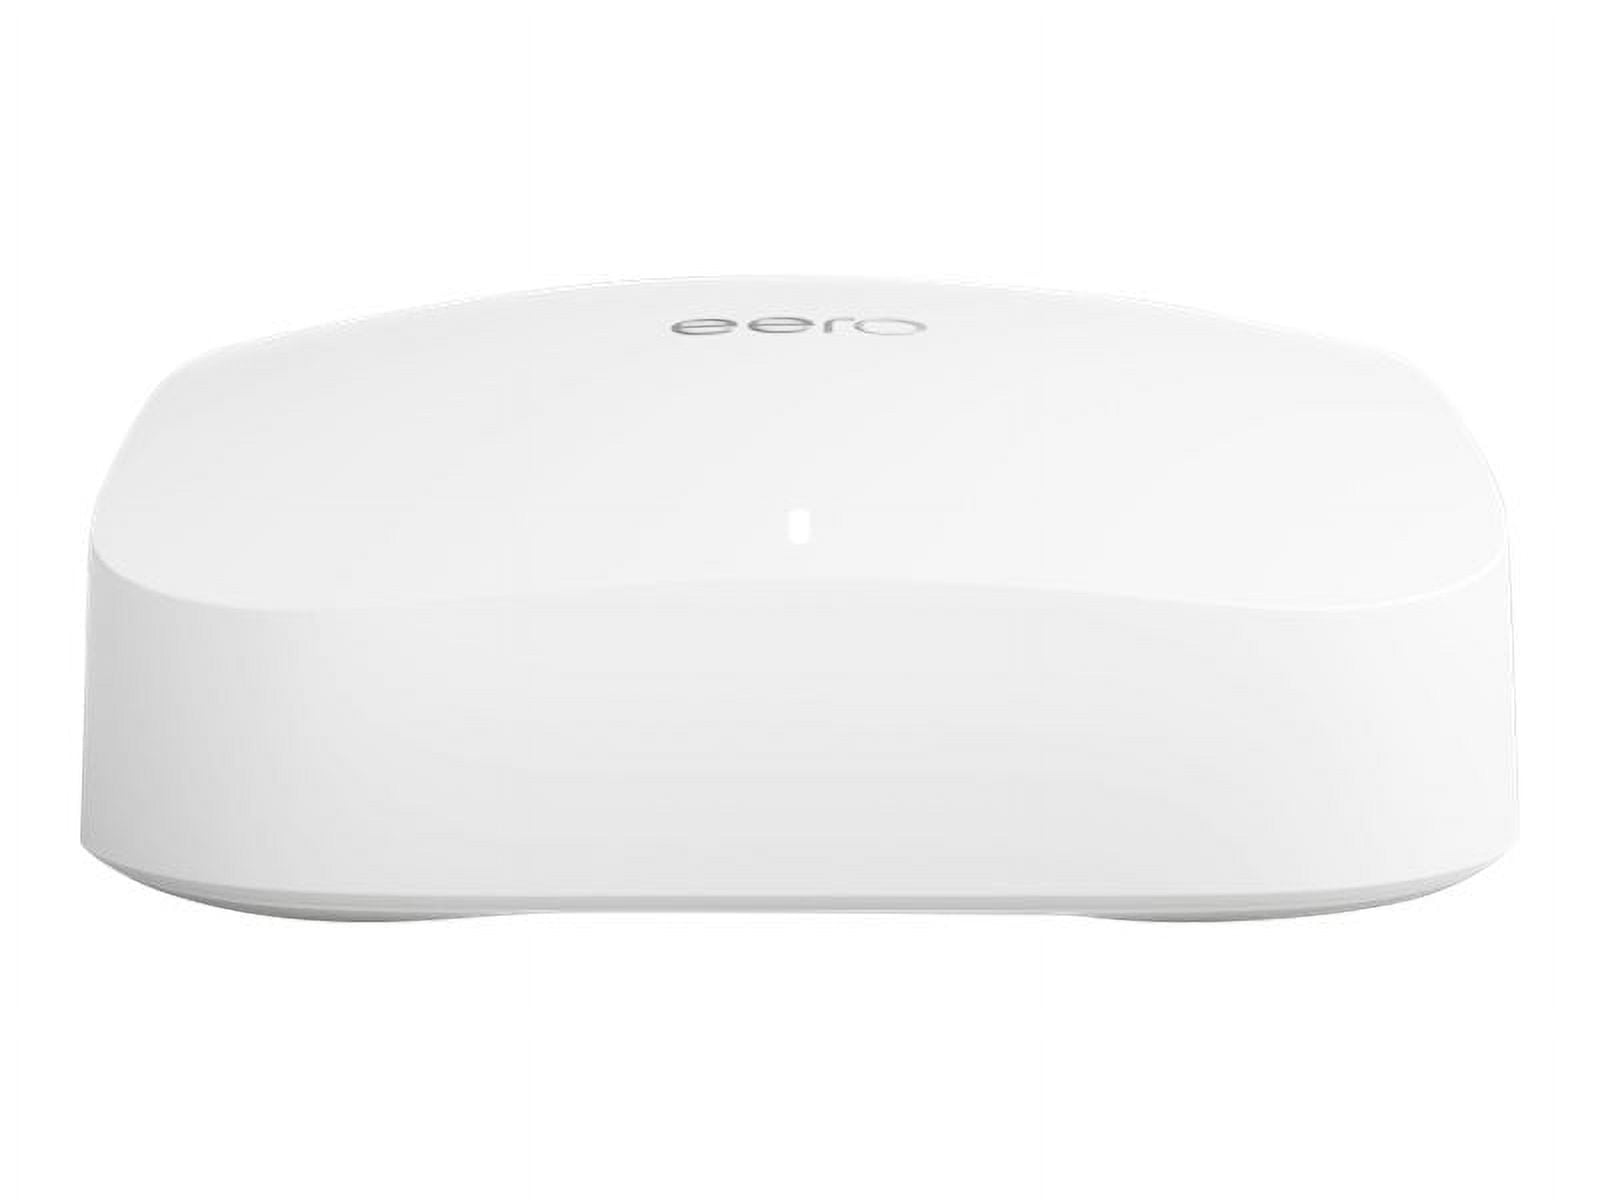 eero 6 AX1800 Wi-Fi 6 Dual-Band Gigabit Mesh System (Router Only, White)